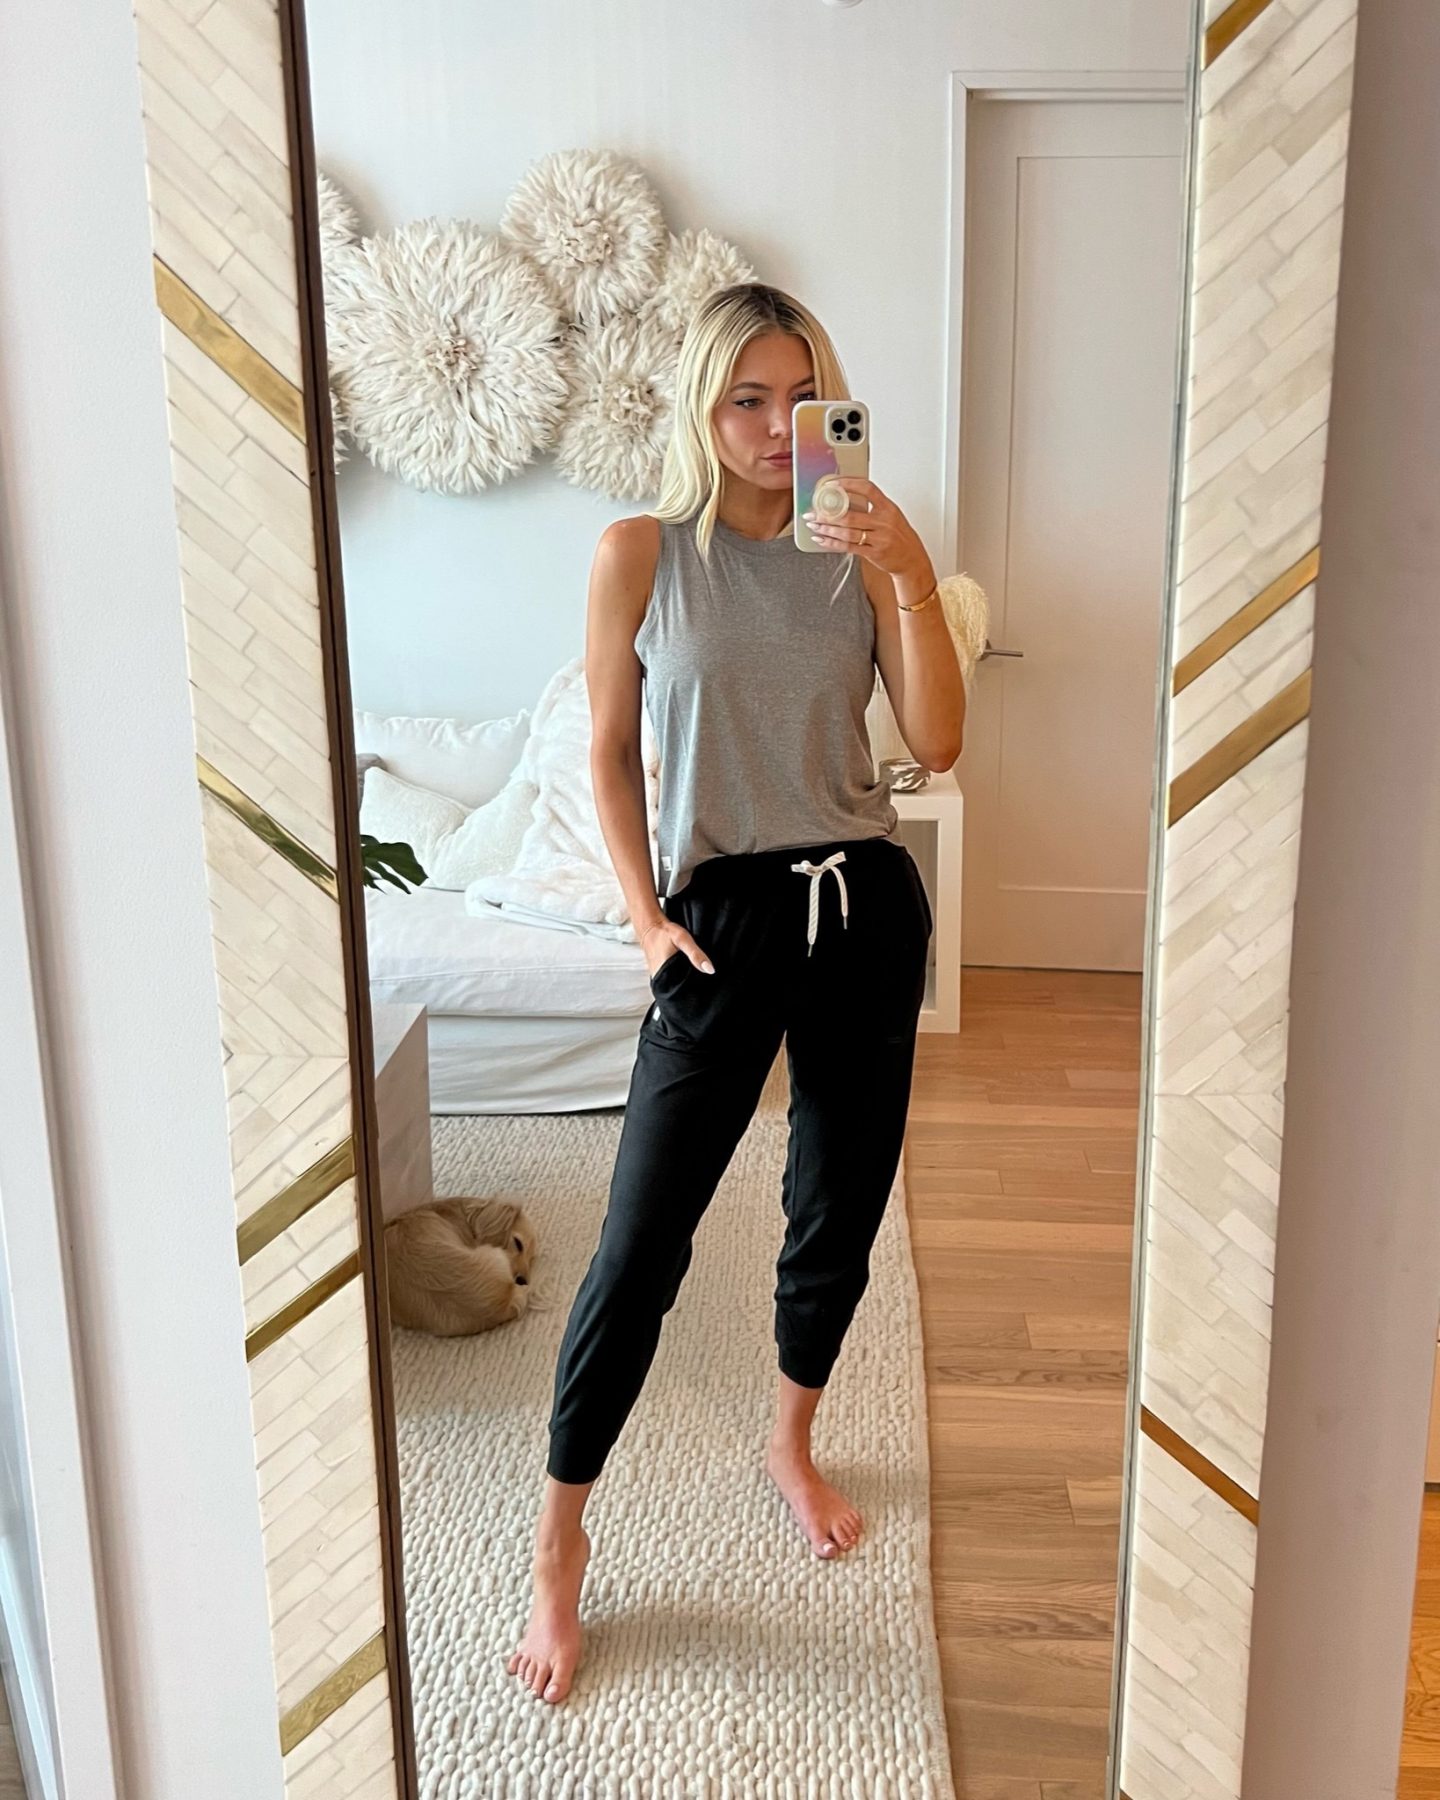 How to Style Sweatpants